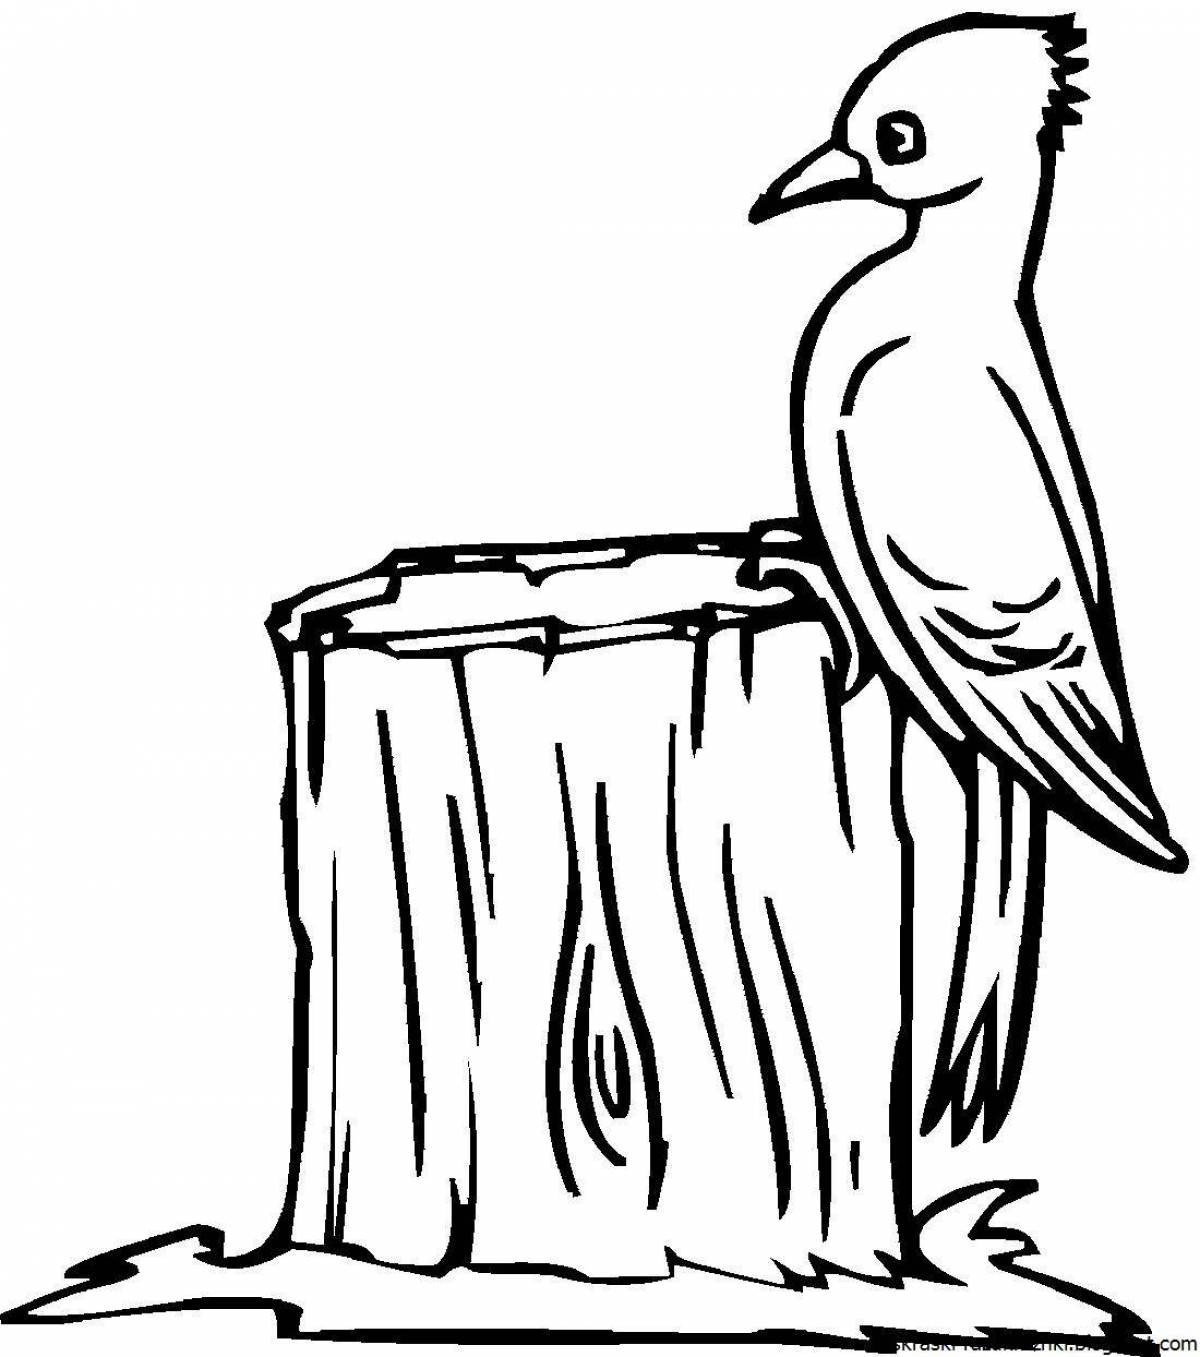 Adorable woodpecker coloring page for kids